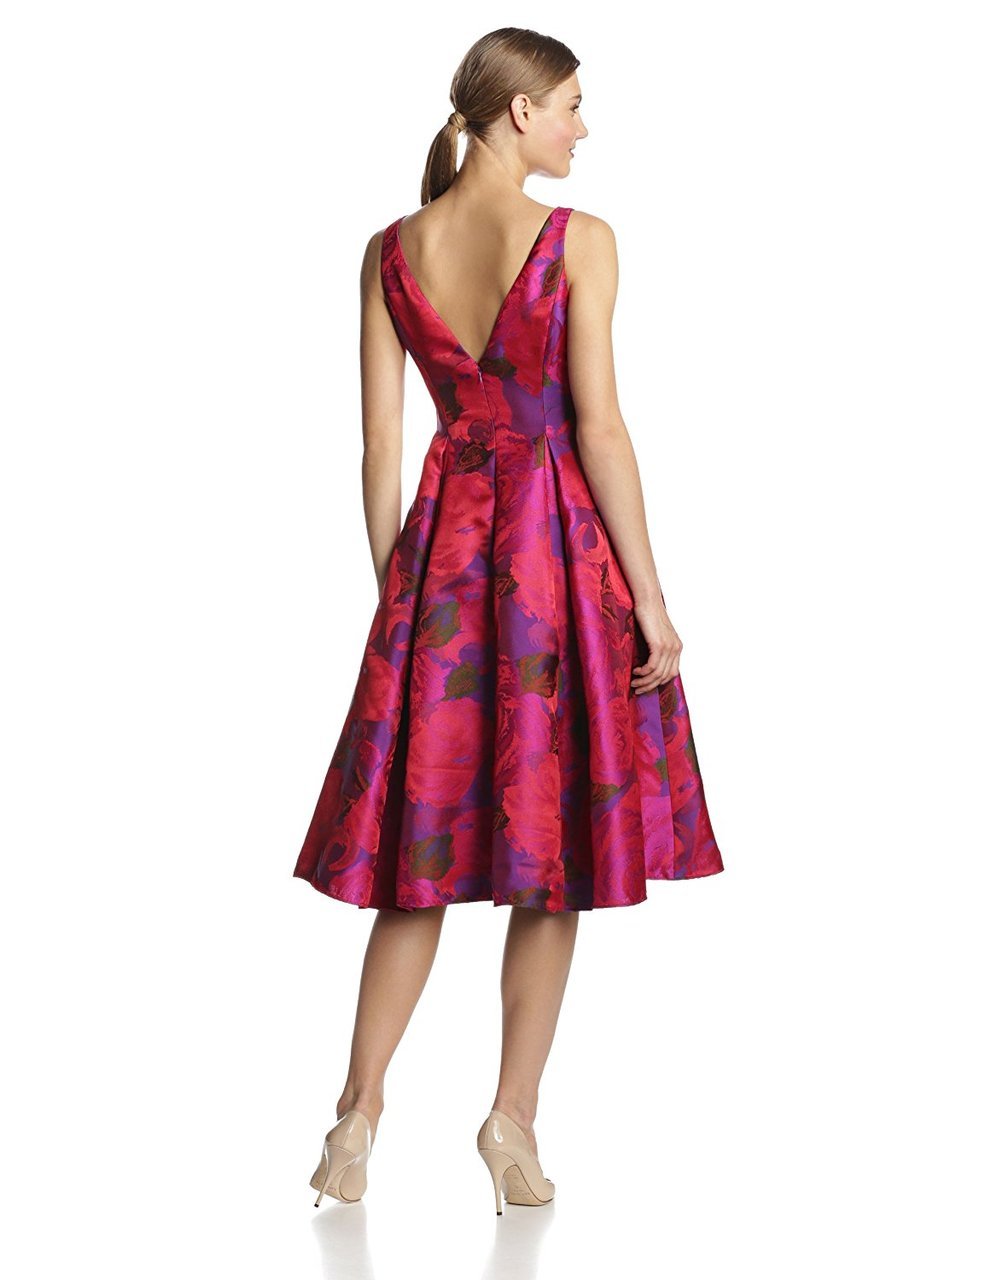 Adrianna Papell - 41889270 Tea-Length Jacquard Floral Print Dress in Pink and Floral